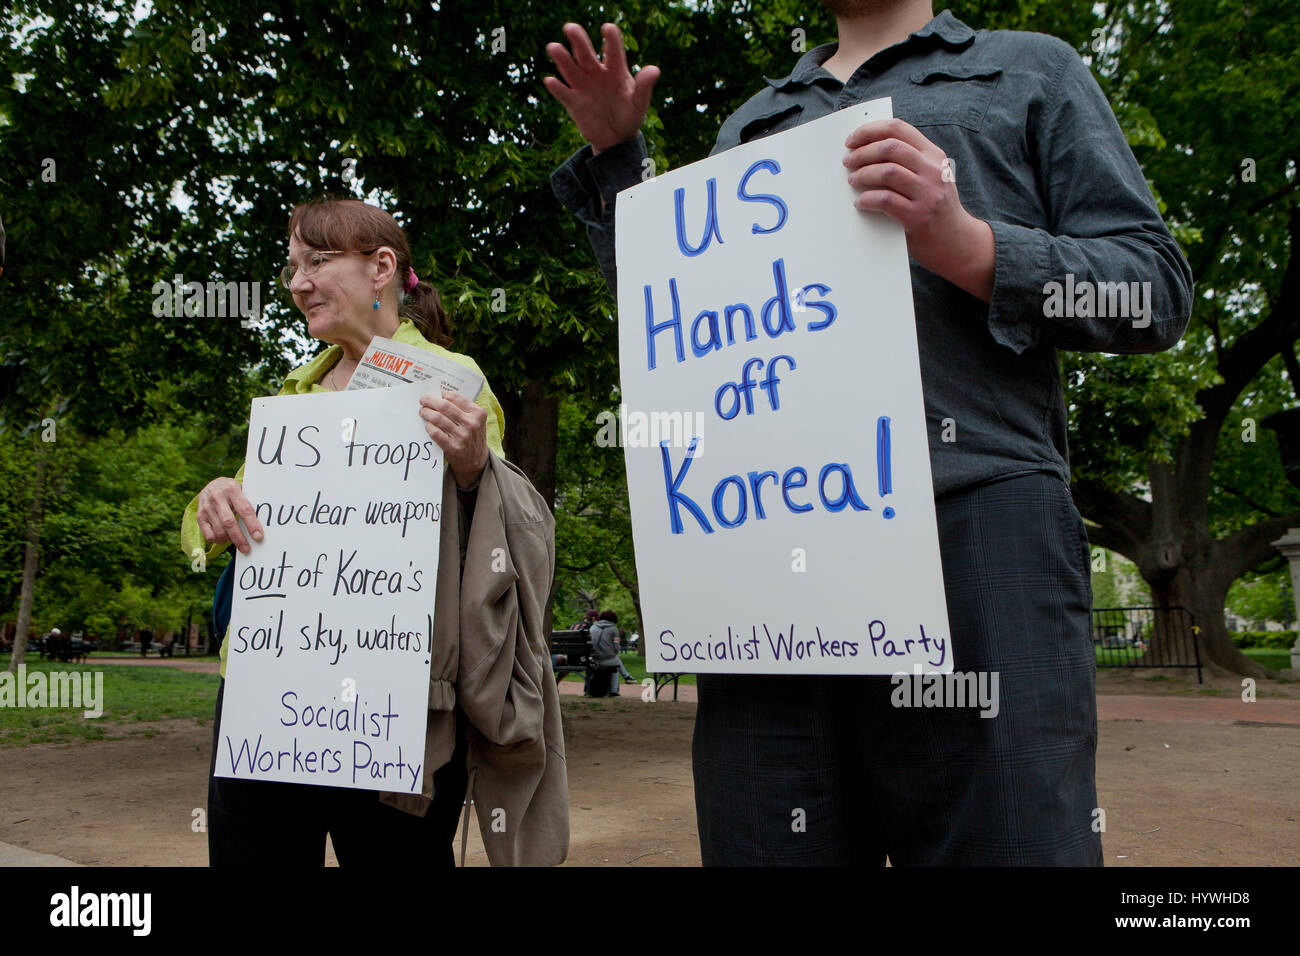 Washington, DC, USA. 26th April, 2017. As tensions continue to rise between US and North Korea, members of the Socialist Workers Party protest against US involvement in the Korean peninsula in front of the White House. Credit: B Christopher/Alamy Live News Stock Photo